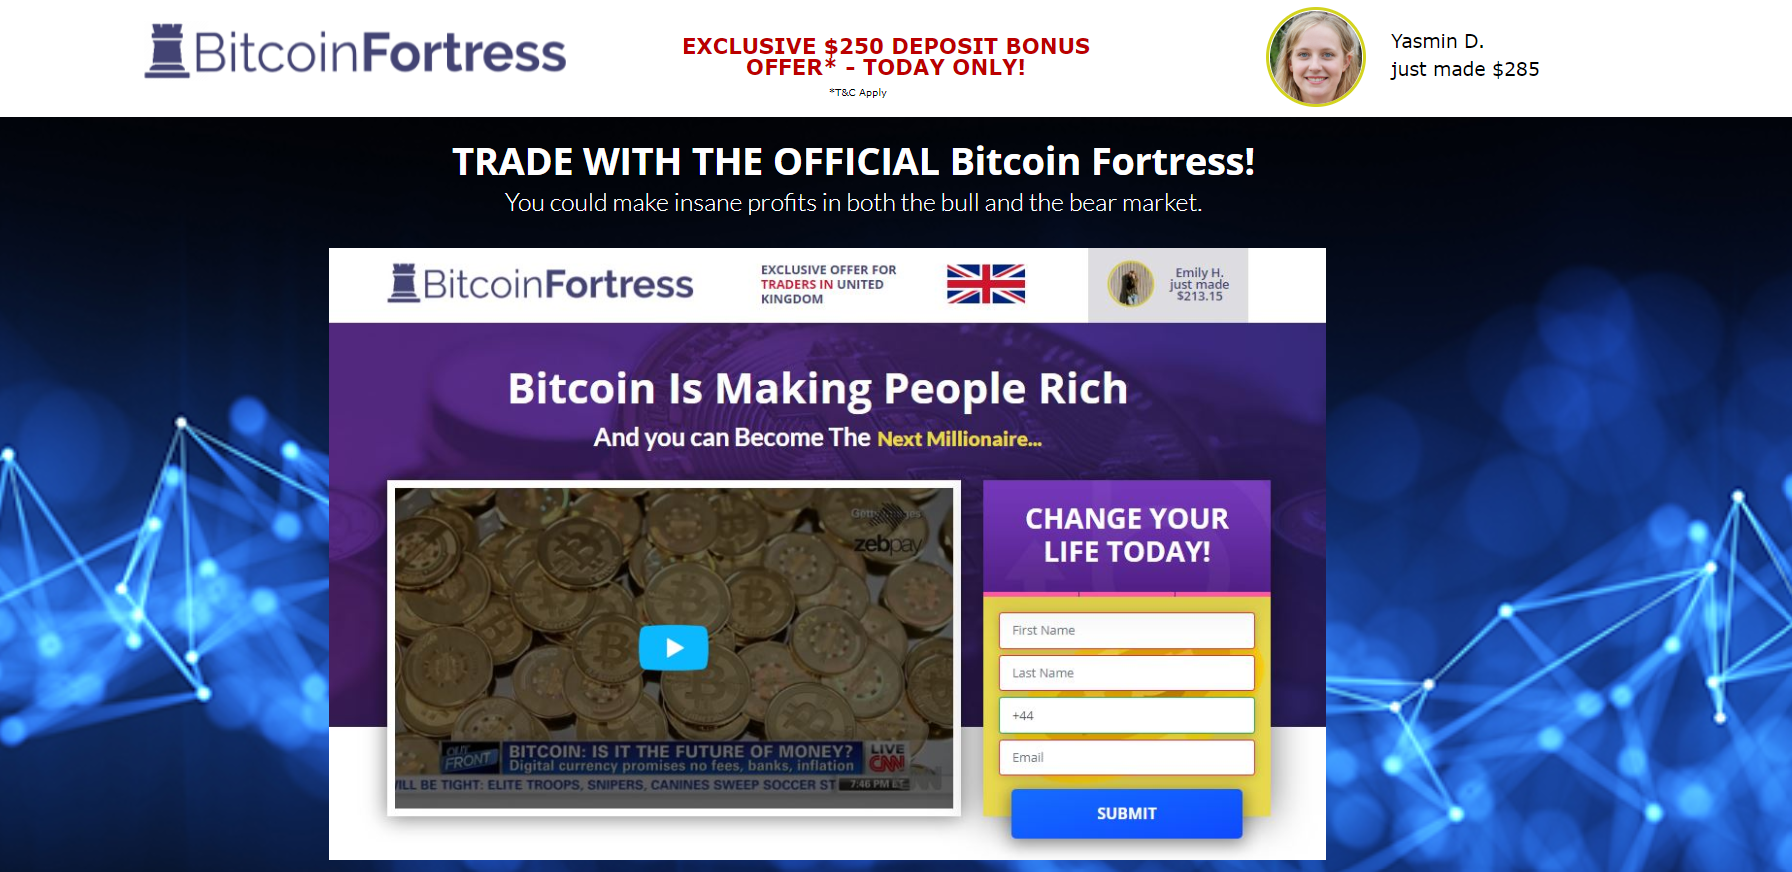 the official website of Bitcoin Fortress